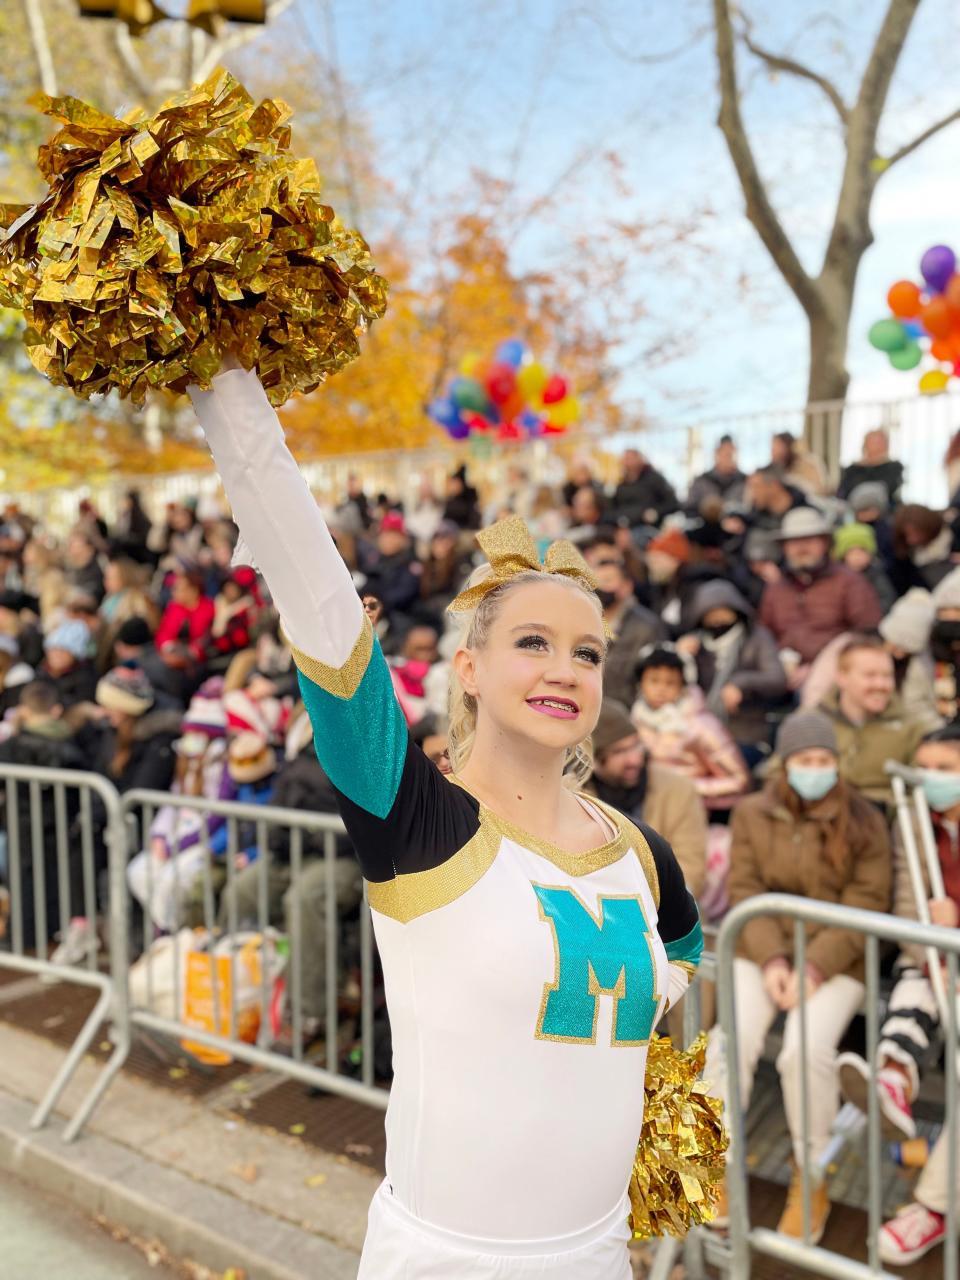 Washington High School cheerleader Hallie Dancer waves to spectators along the route at the Macy’s Thanksgiving Day parade.